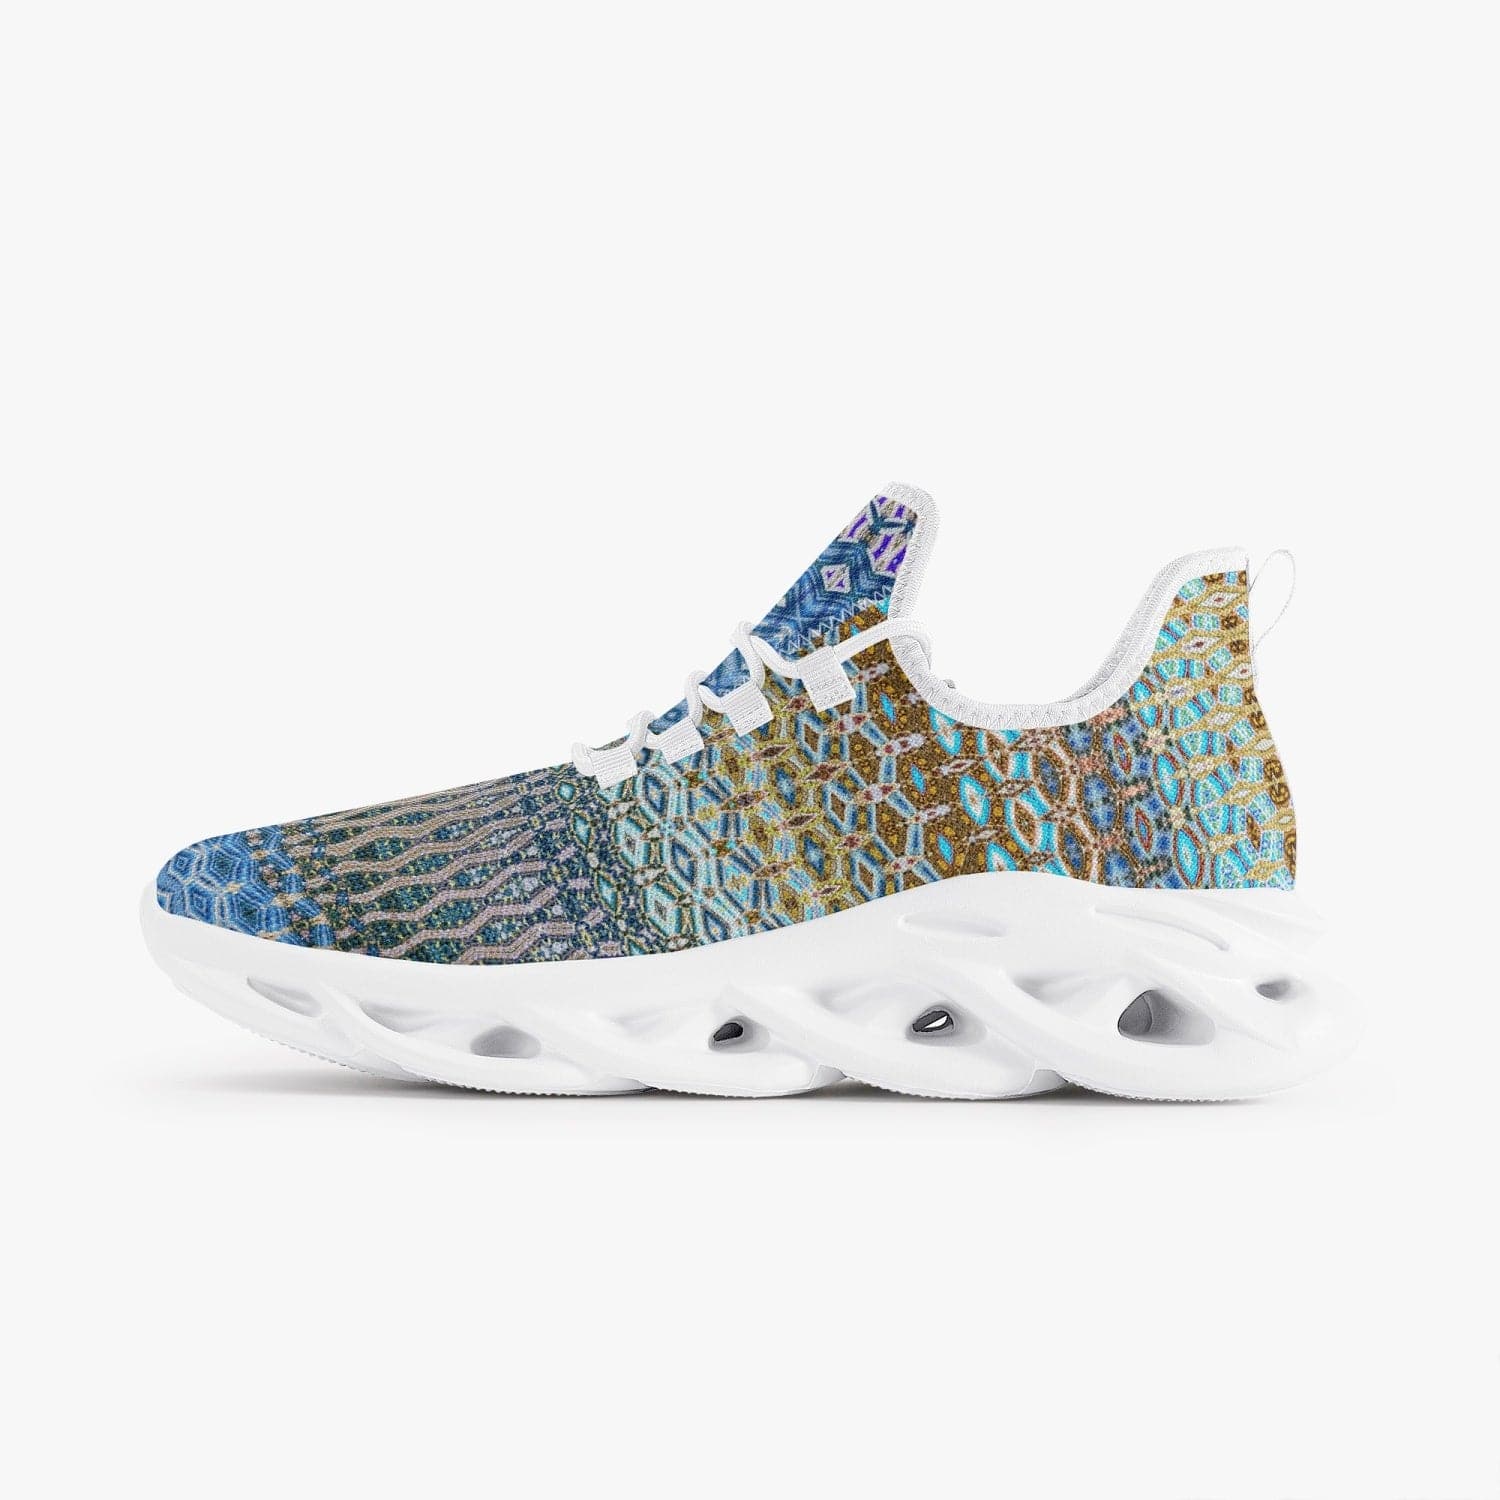 Multiple color patterned blue and mauve,  Bounce Mesh Knit Sneakers - White, by Sensus Studio Design